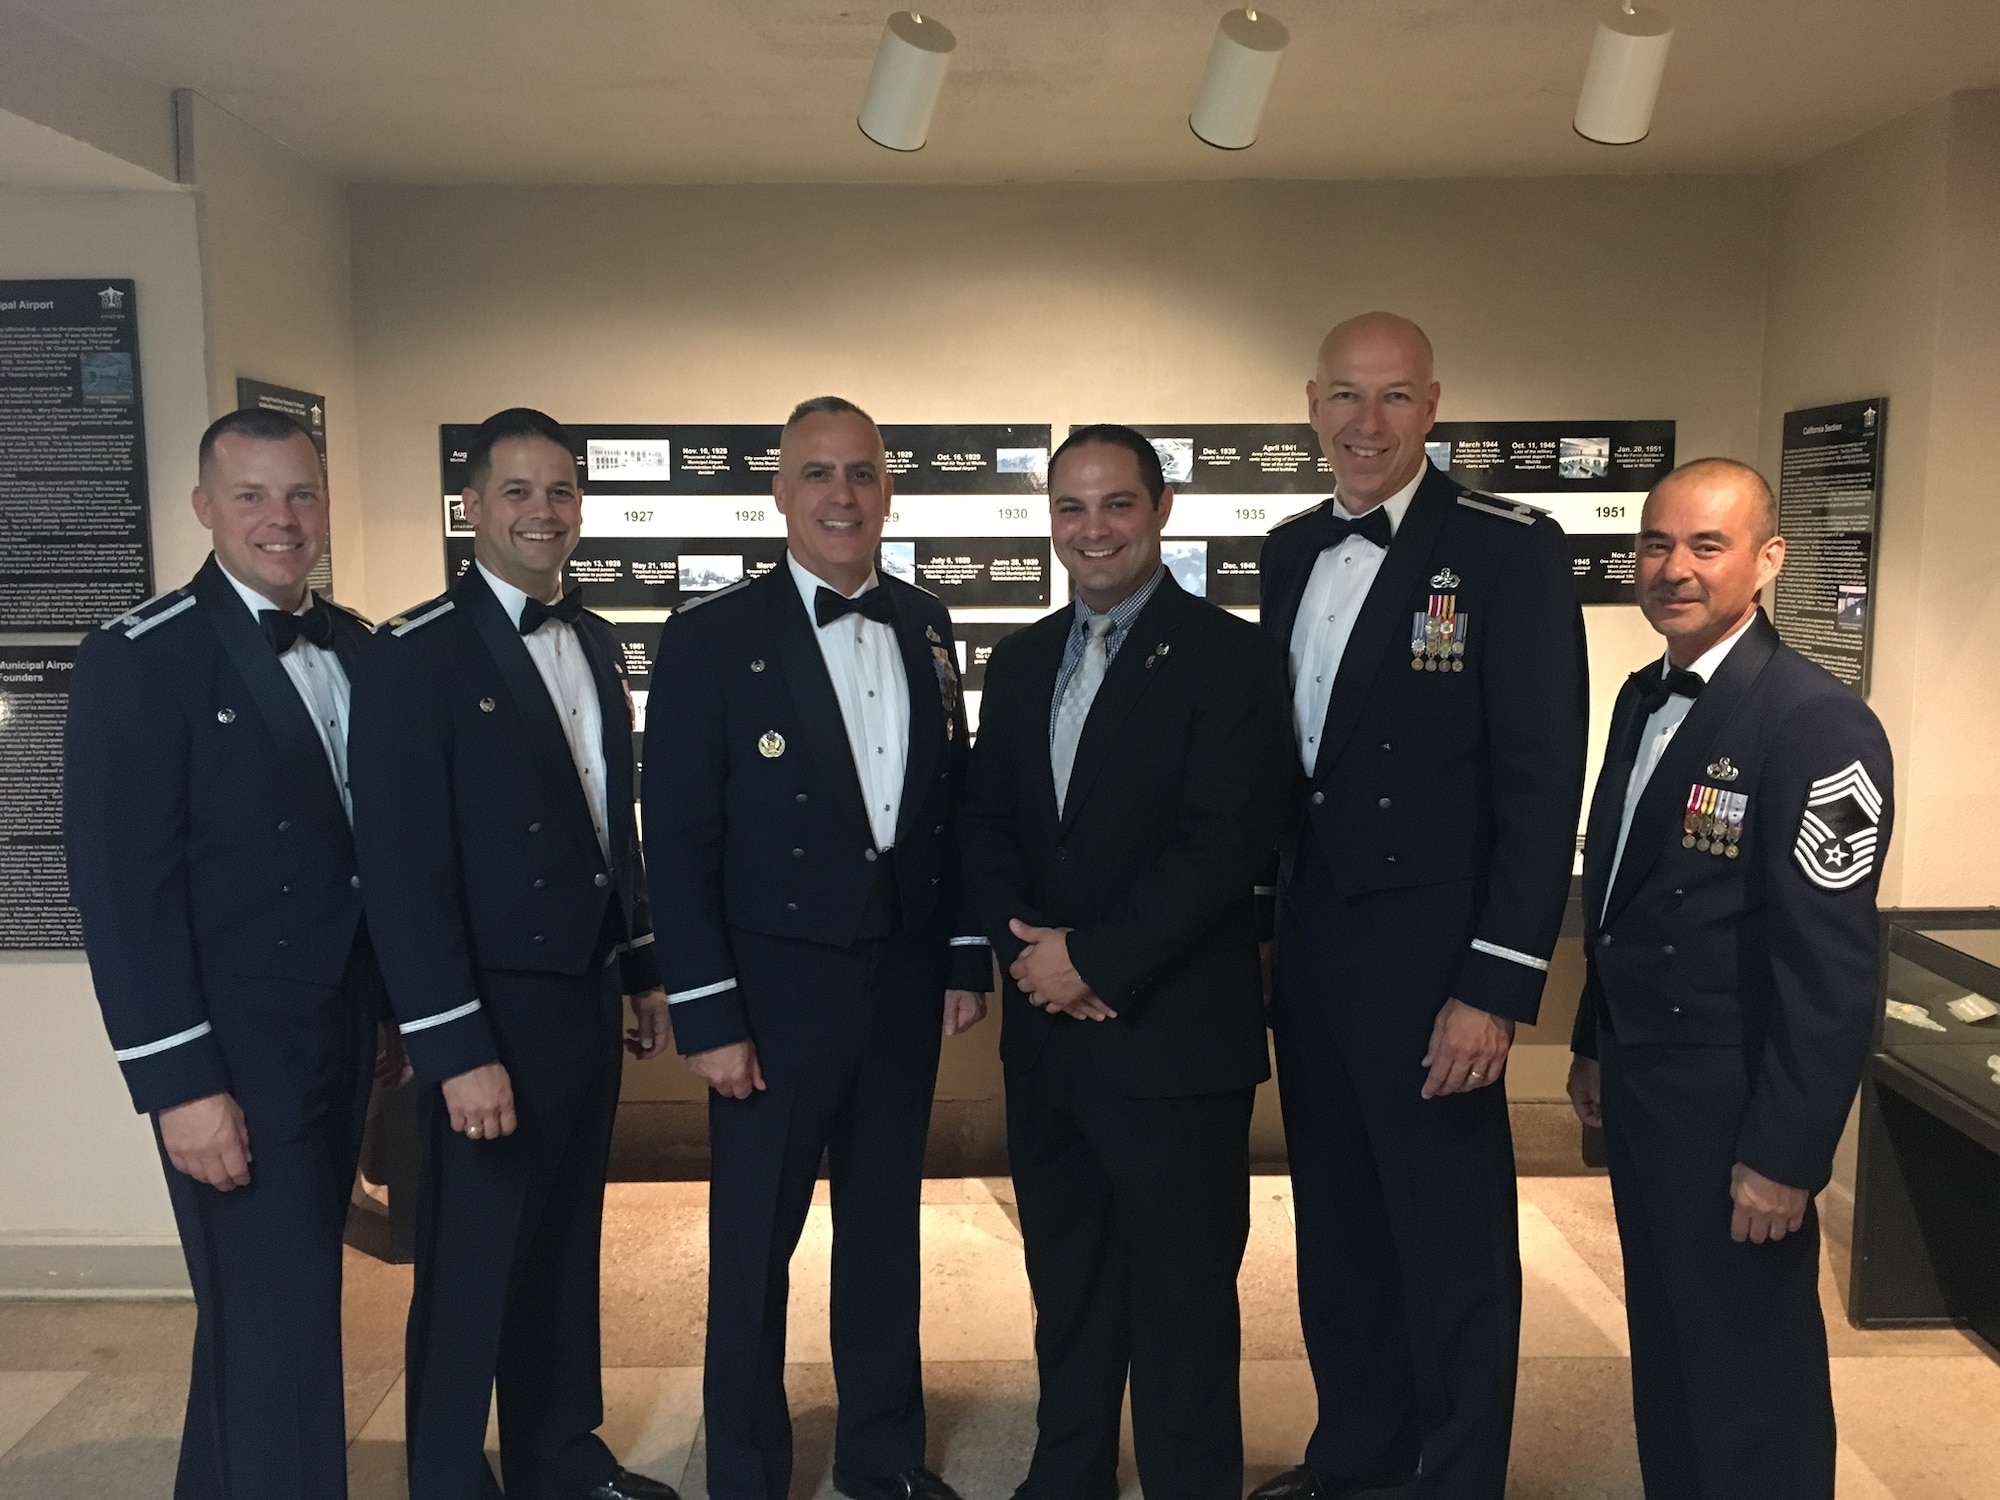 Andrew Nelson (center right), 22nd Maintenance Group honorary commander, poses with 22nd MXG leaders Sep. 16, 2017, at the Air Force Gala at the Wichita Aviation Museum, Kansas. Honorary commanders help Air Force commanders connect with their communities by improving understanding of what the Air Force does and how they help the surrounding cities. (Courtesy photo)